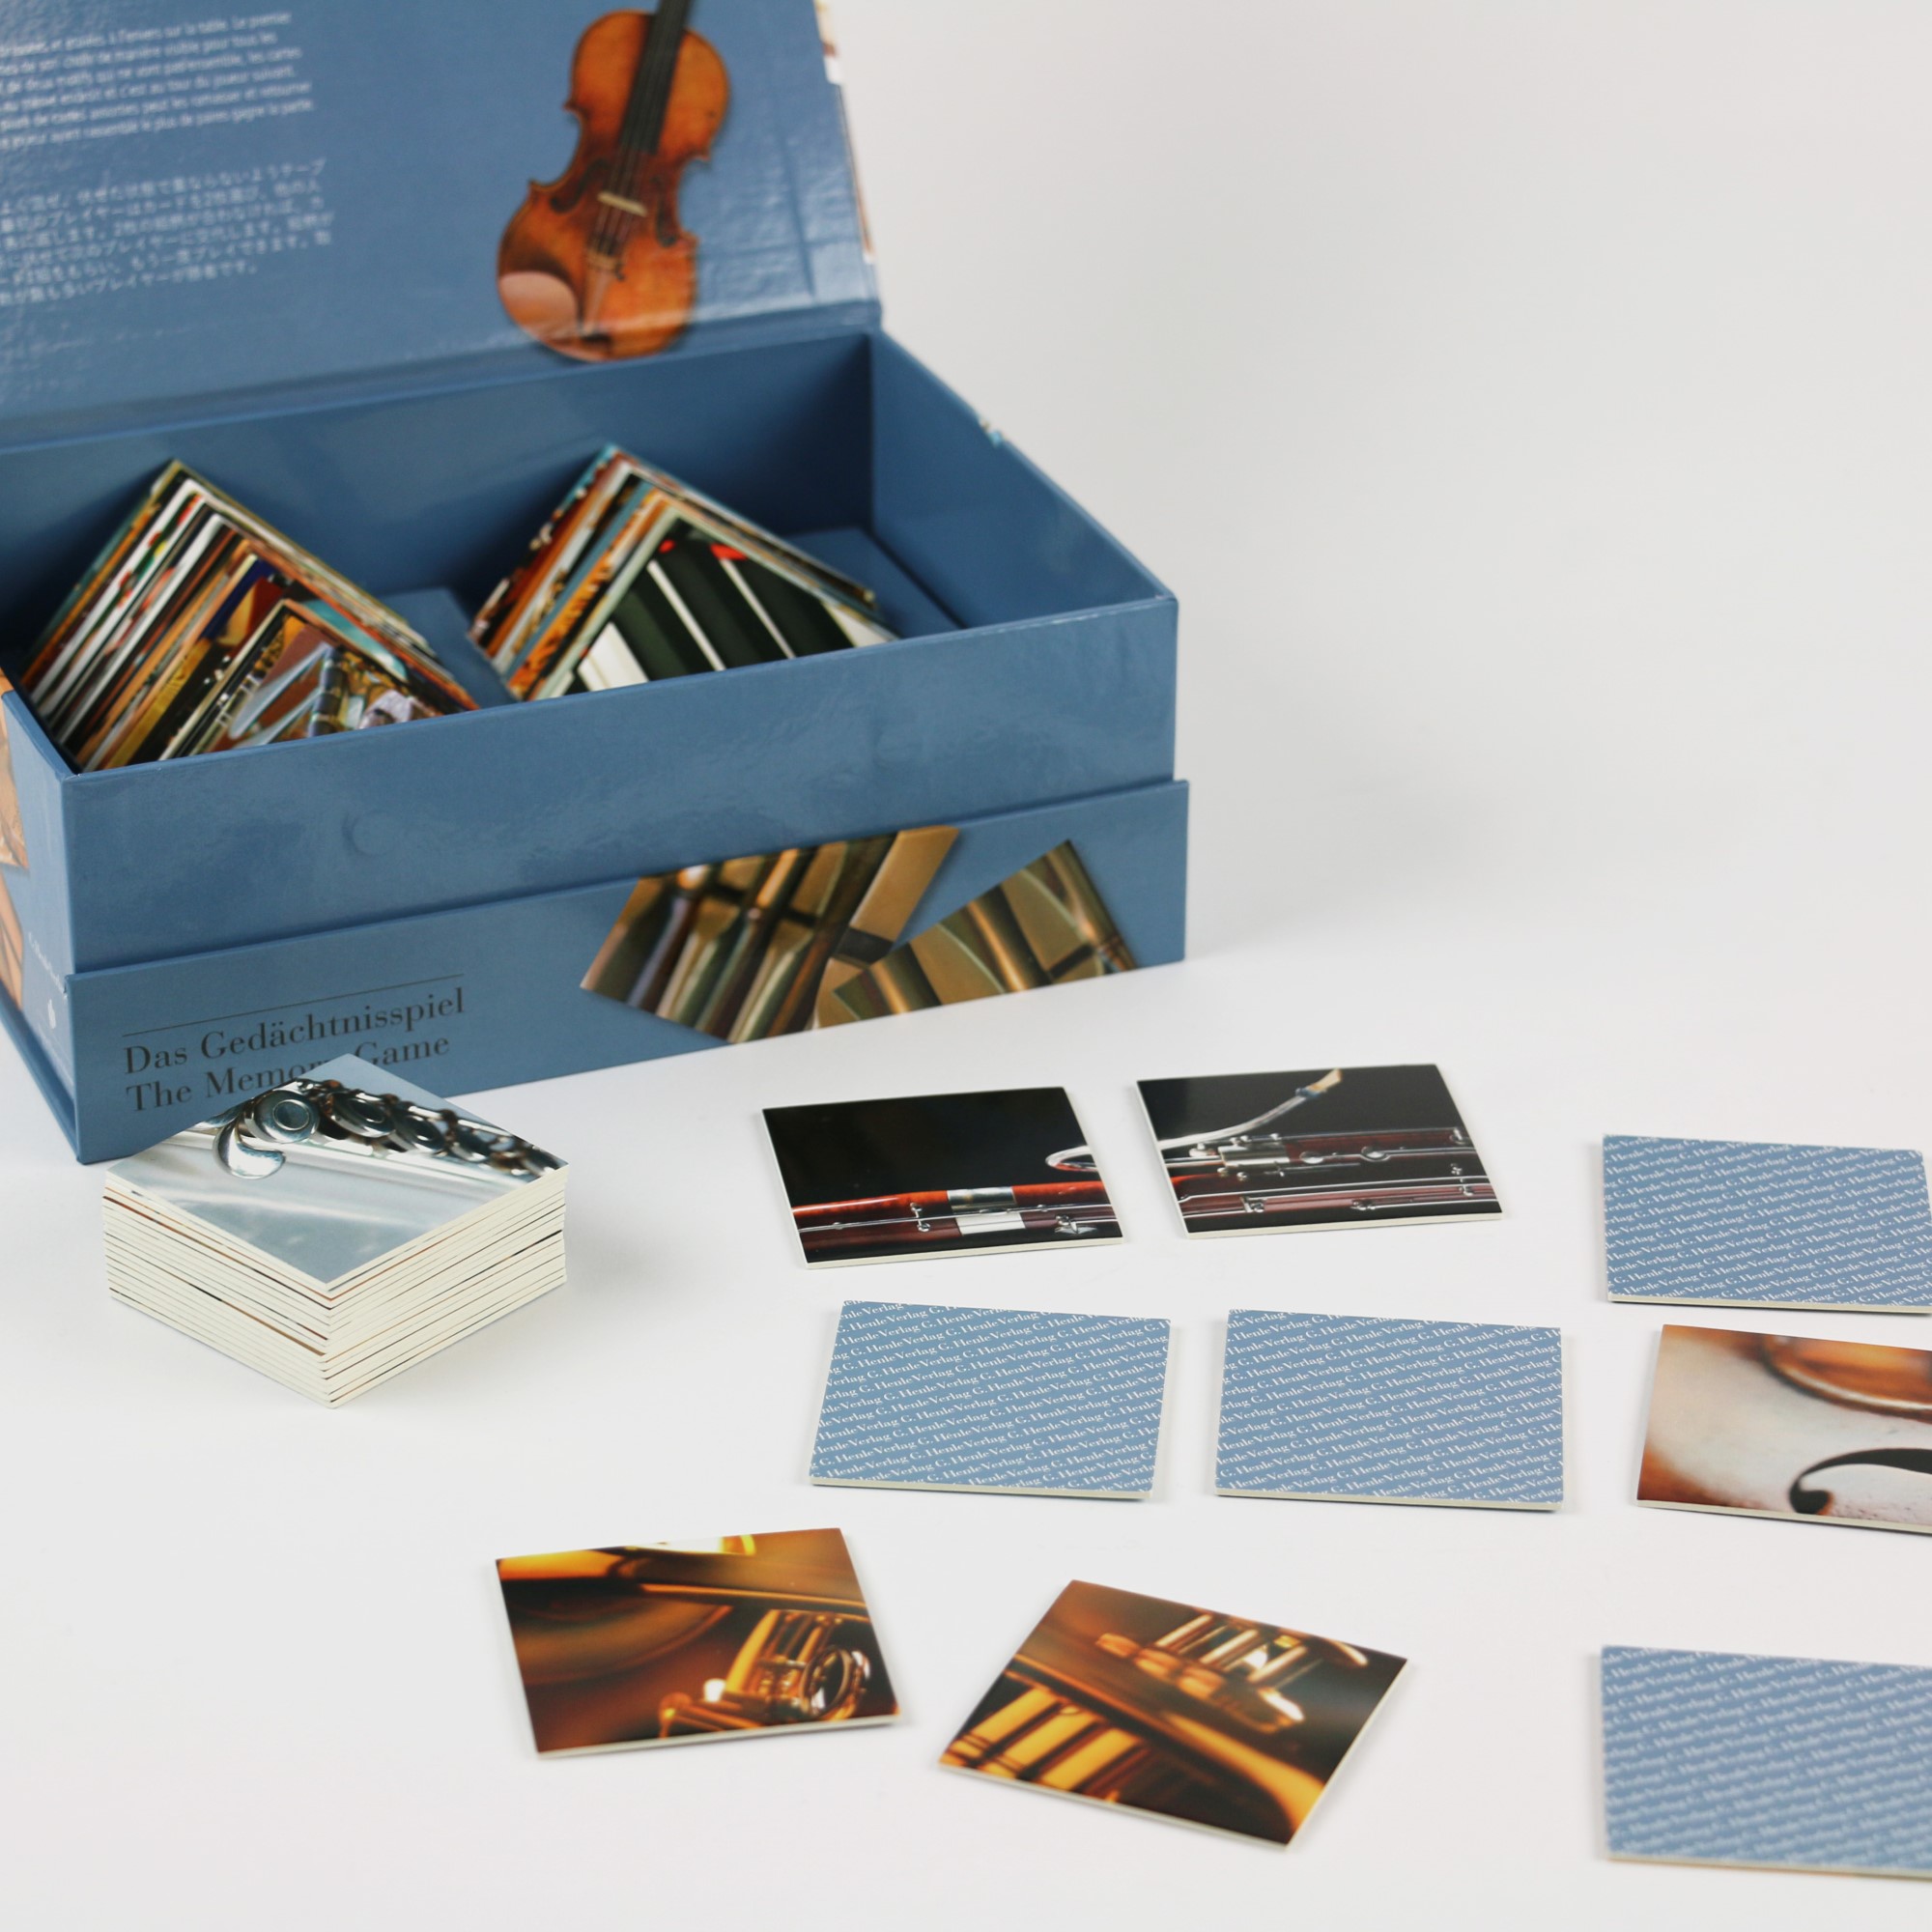 Musical instruments – The memory game
